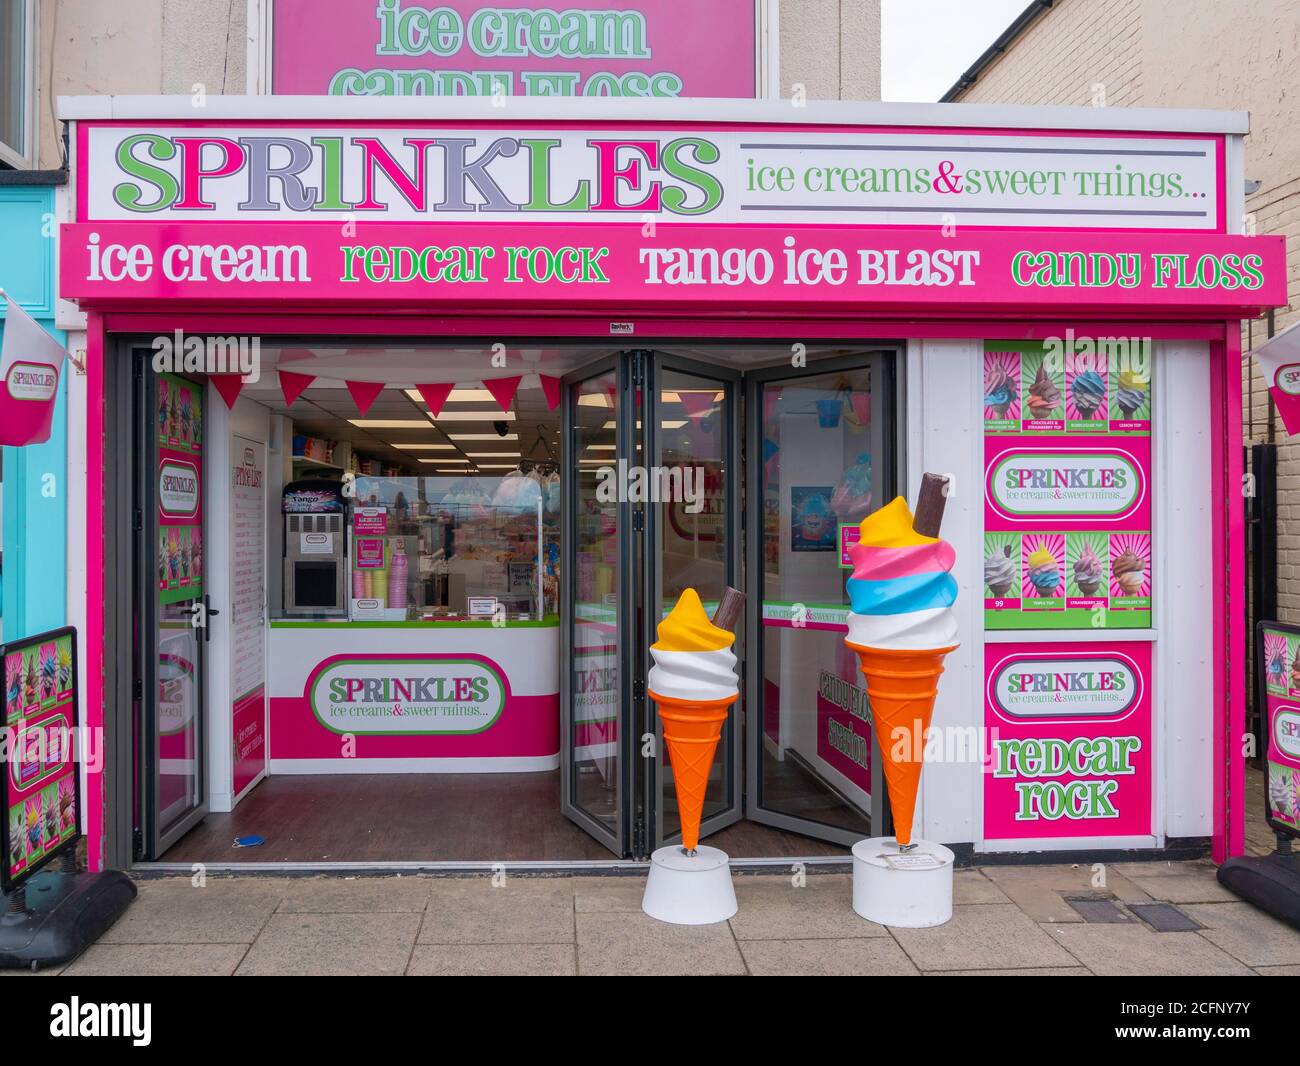 Sprinkles a traditional seaside rock and ice cream shop on the seafront at Redcar Cleveland Stock Photo